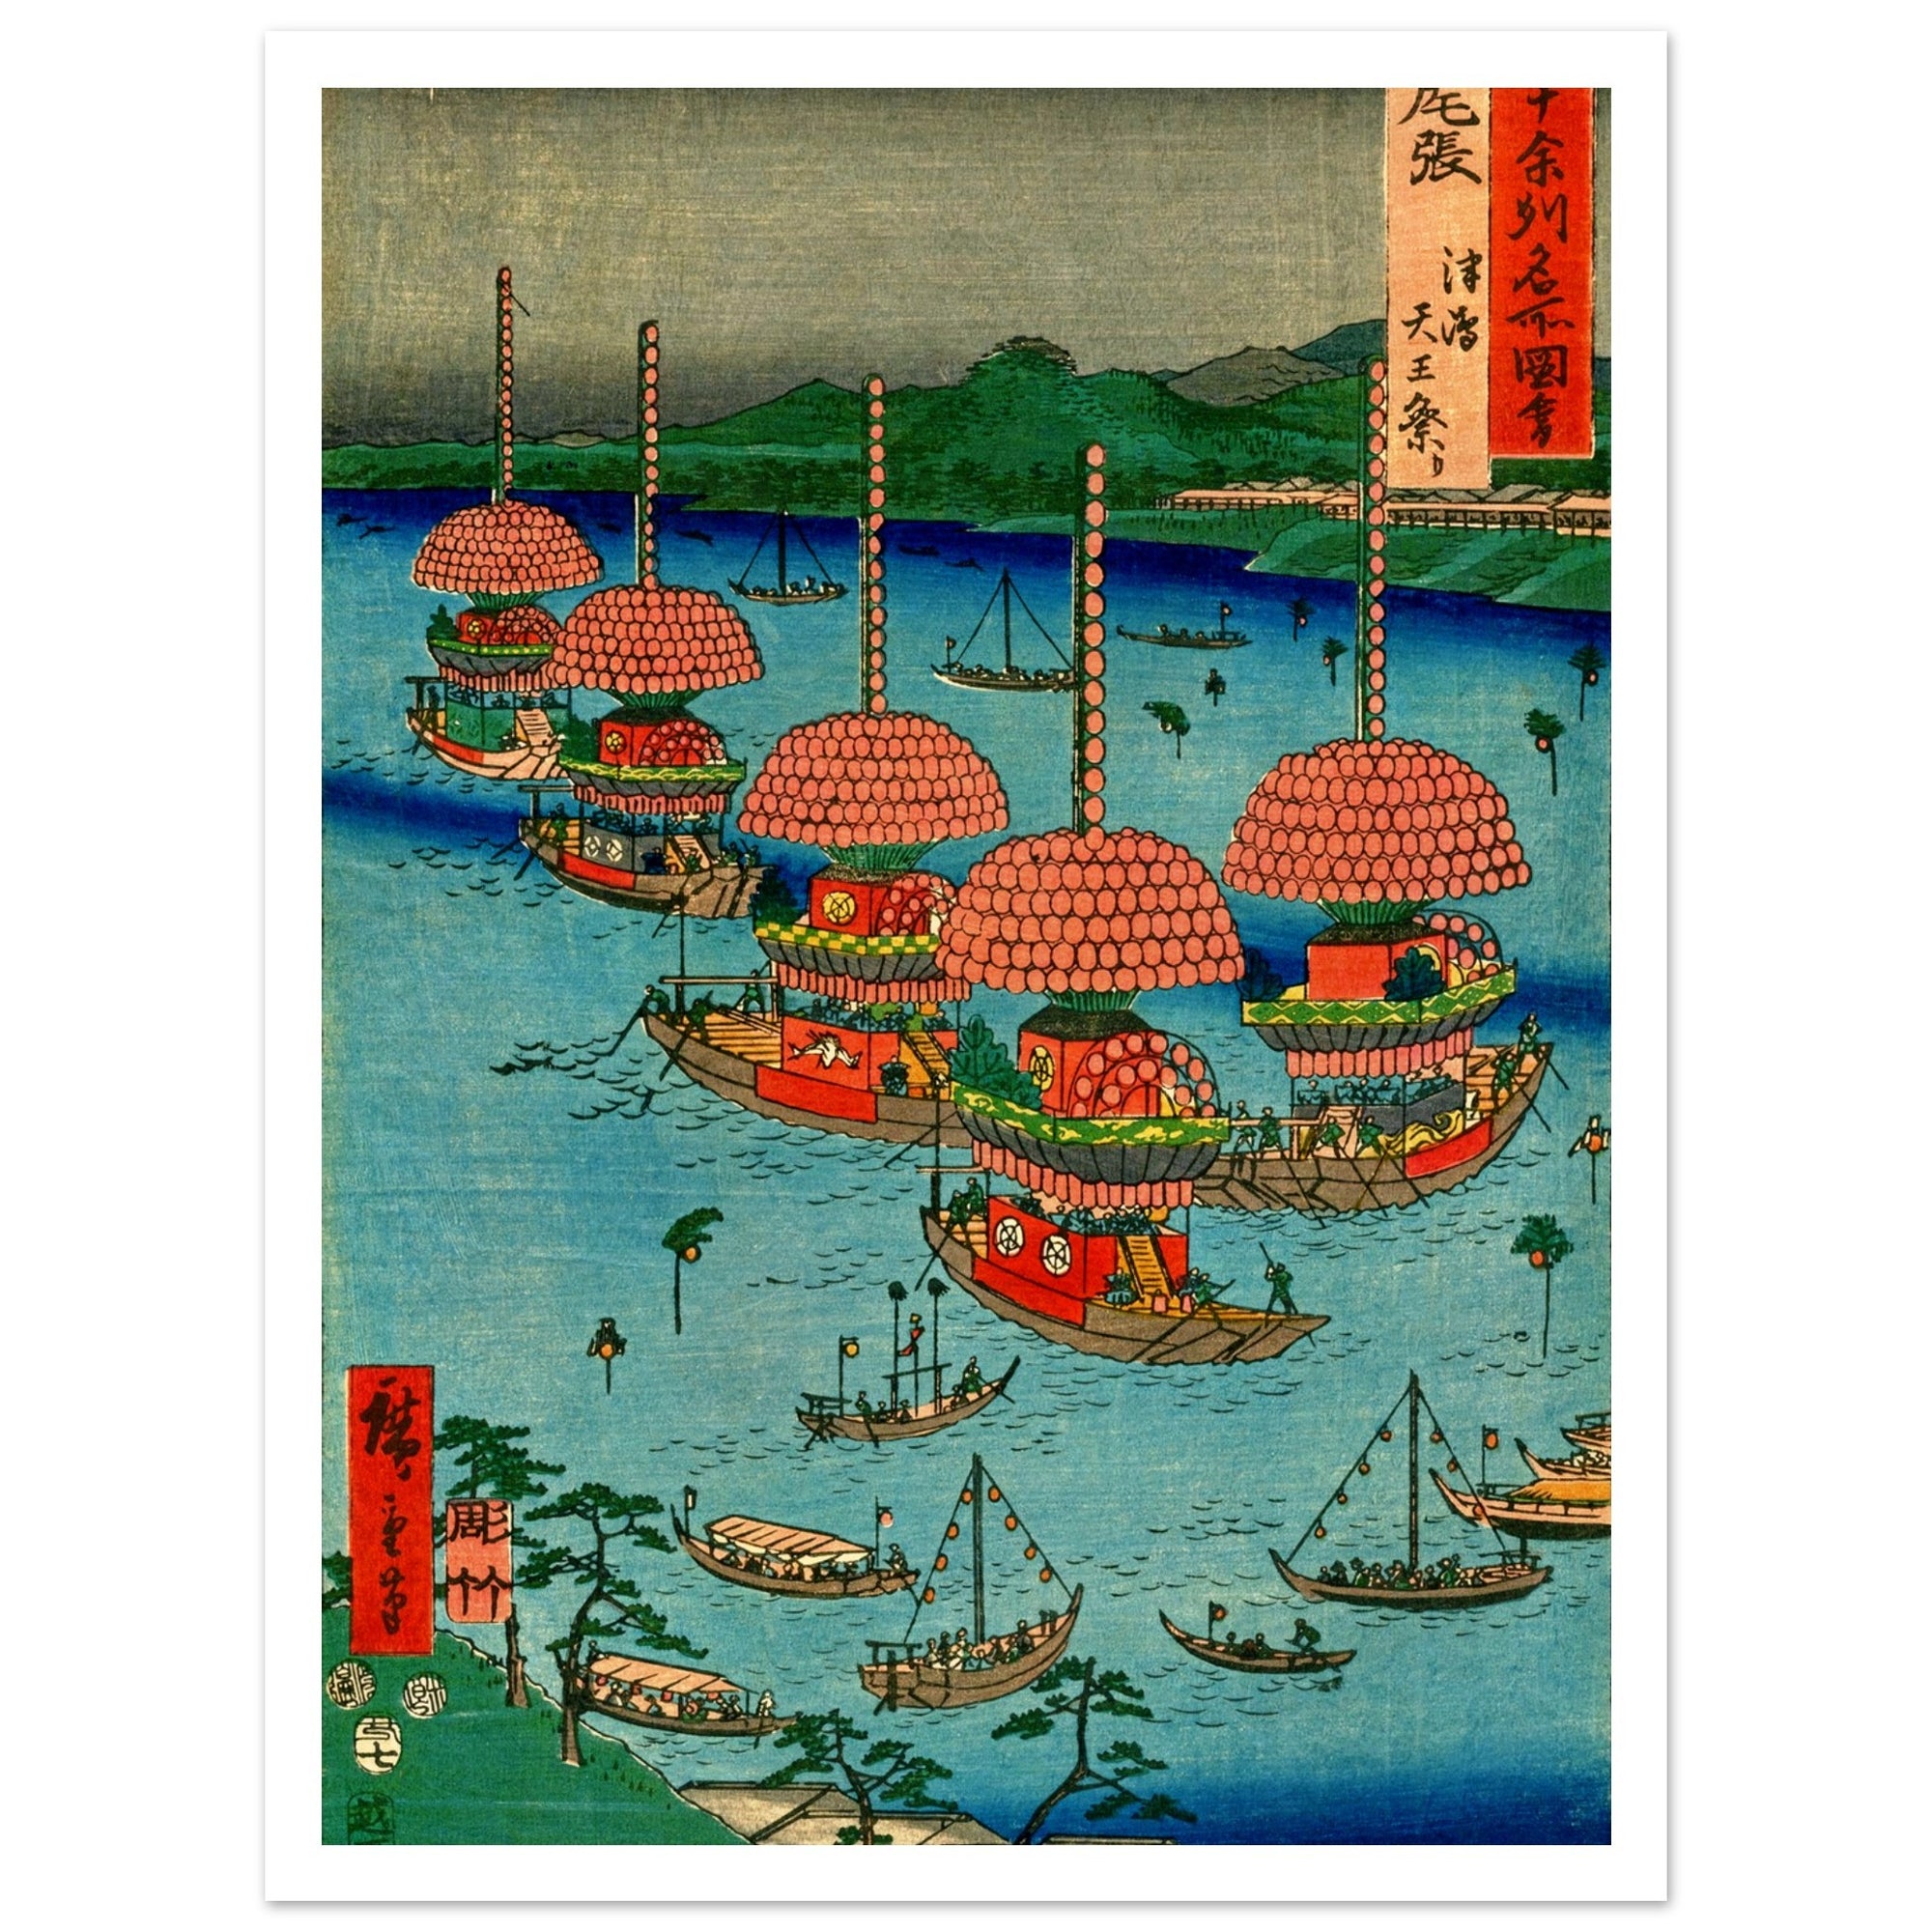 vintage japanese art poster with boats in water